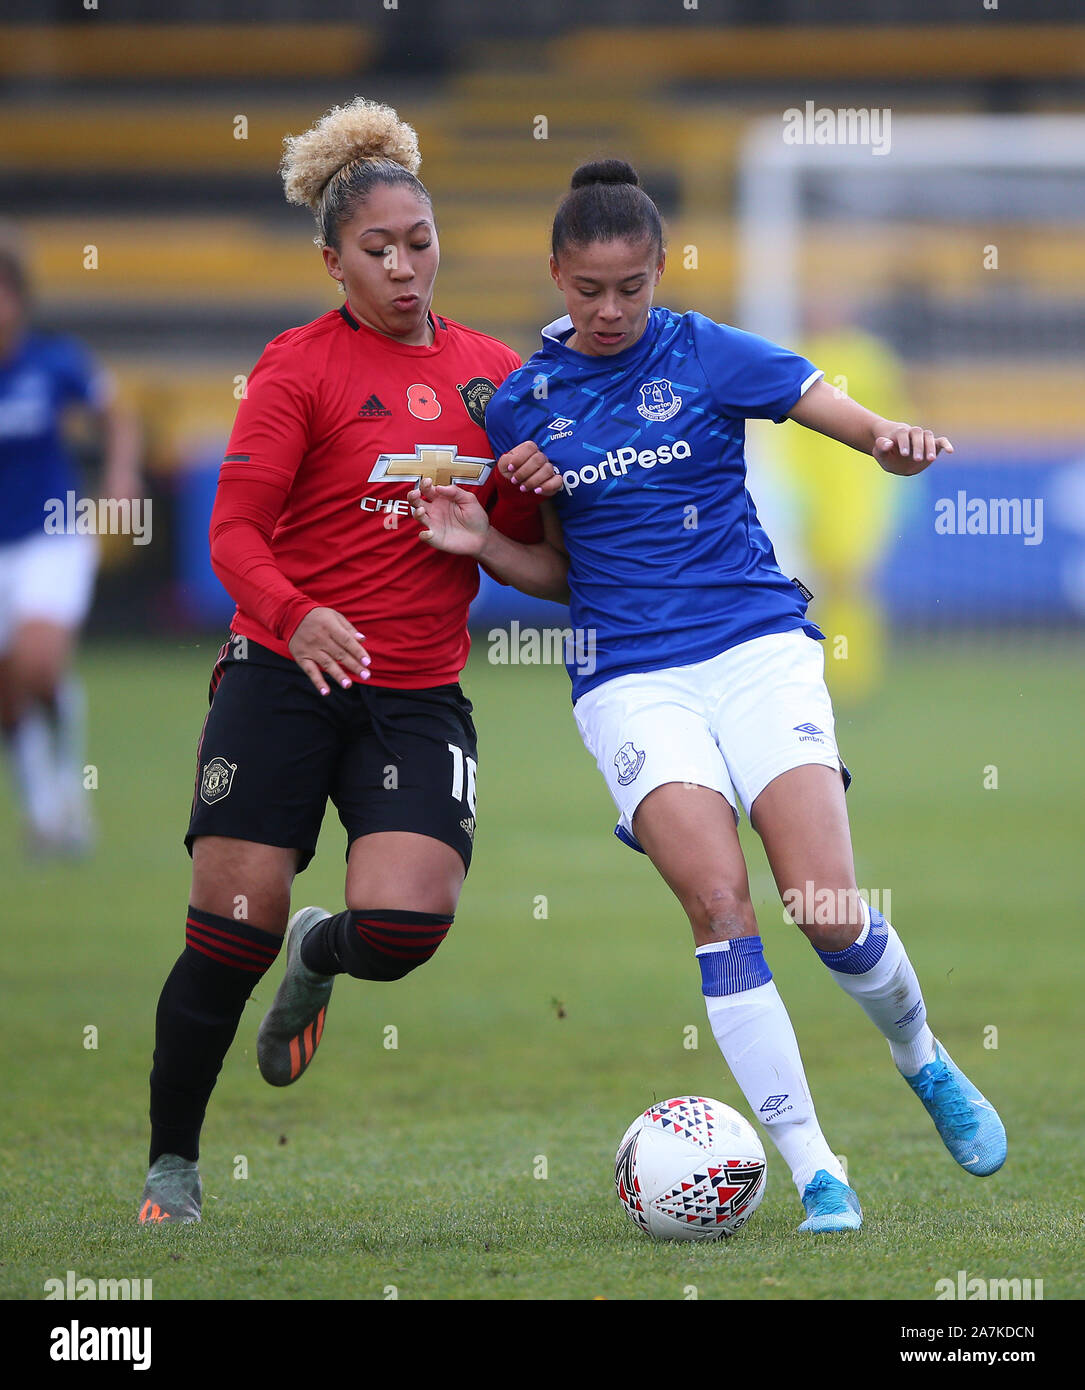 https://c8.alamy.com/comp/2A7KDCN/evertons-chantelle-boye-hlorkah-right-and-manchester-uniteds-lauren-james-battle-for-the-ball-during-the-fa-womens-continental-league-cup-match-at-haig-avenue-liverpool-2A7KDCN.jpg